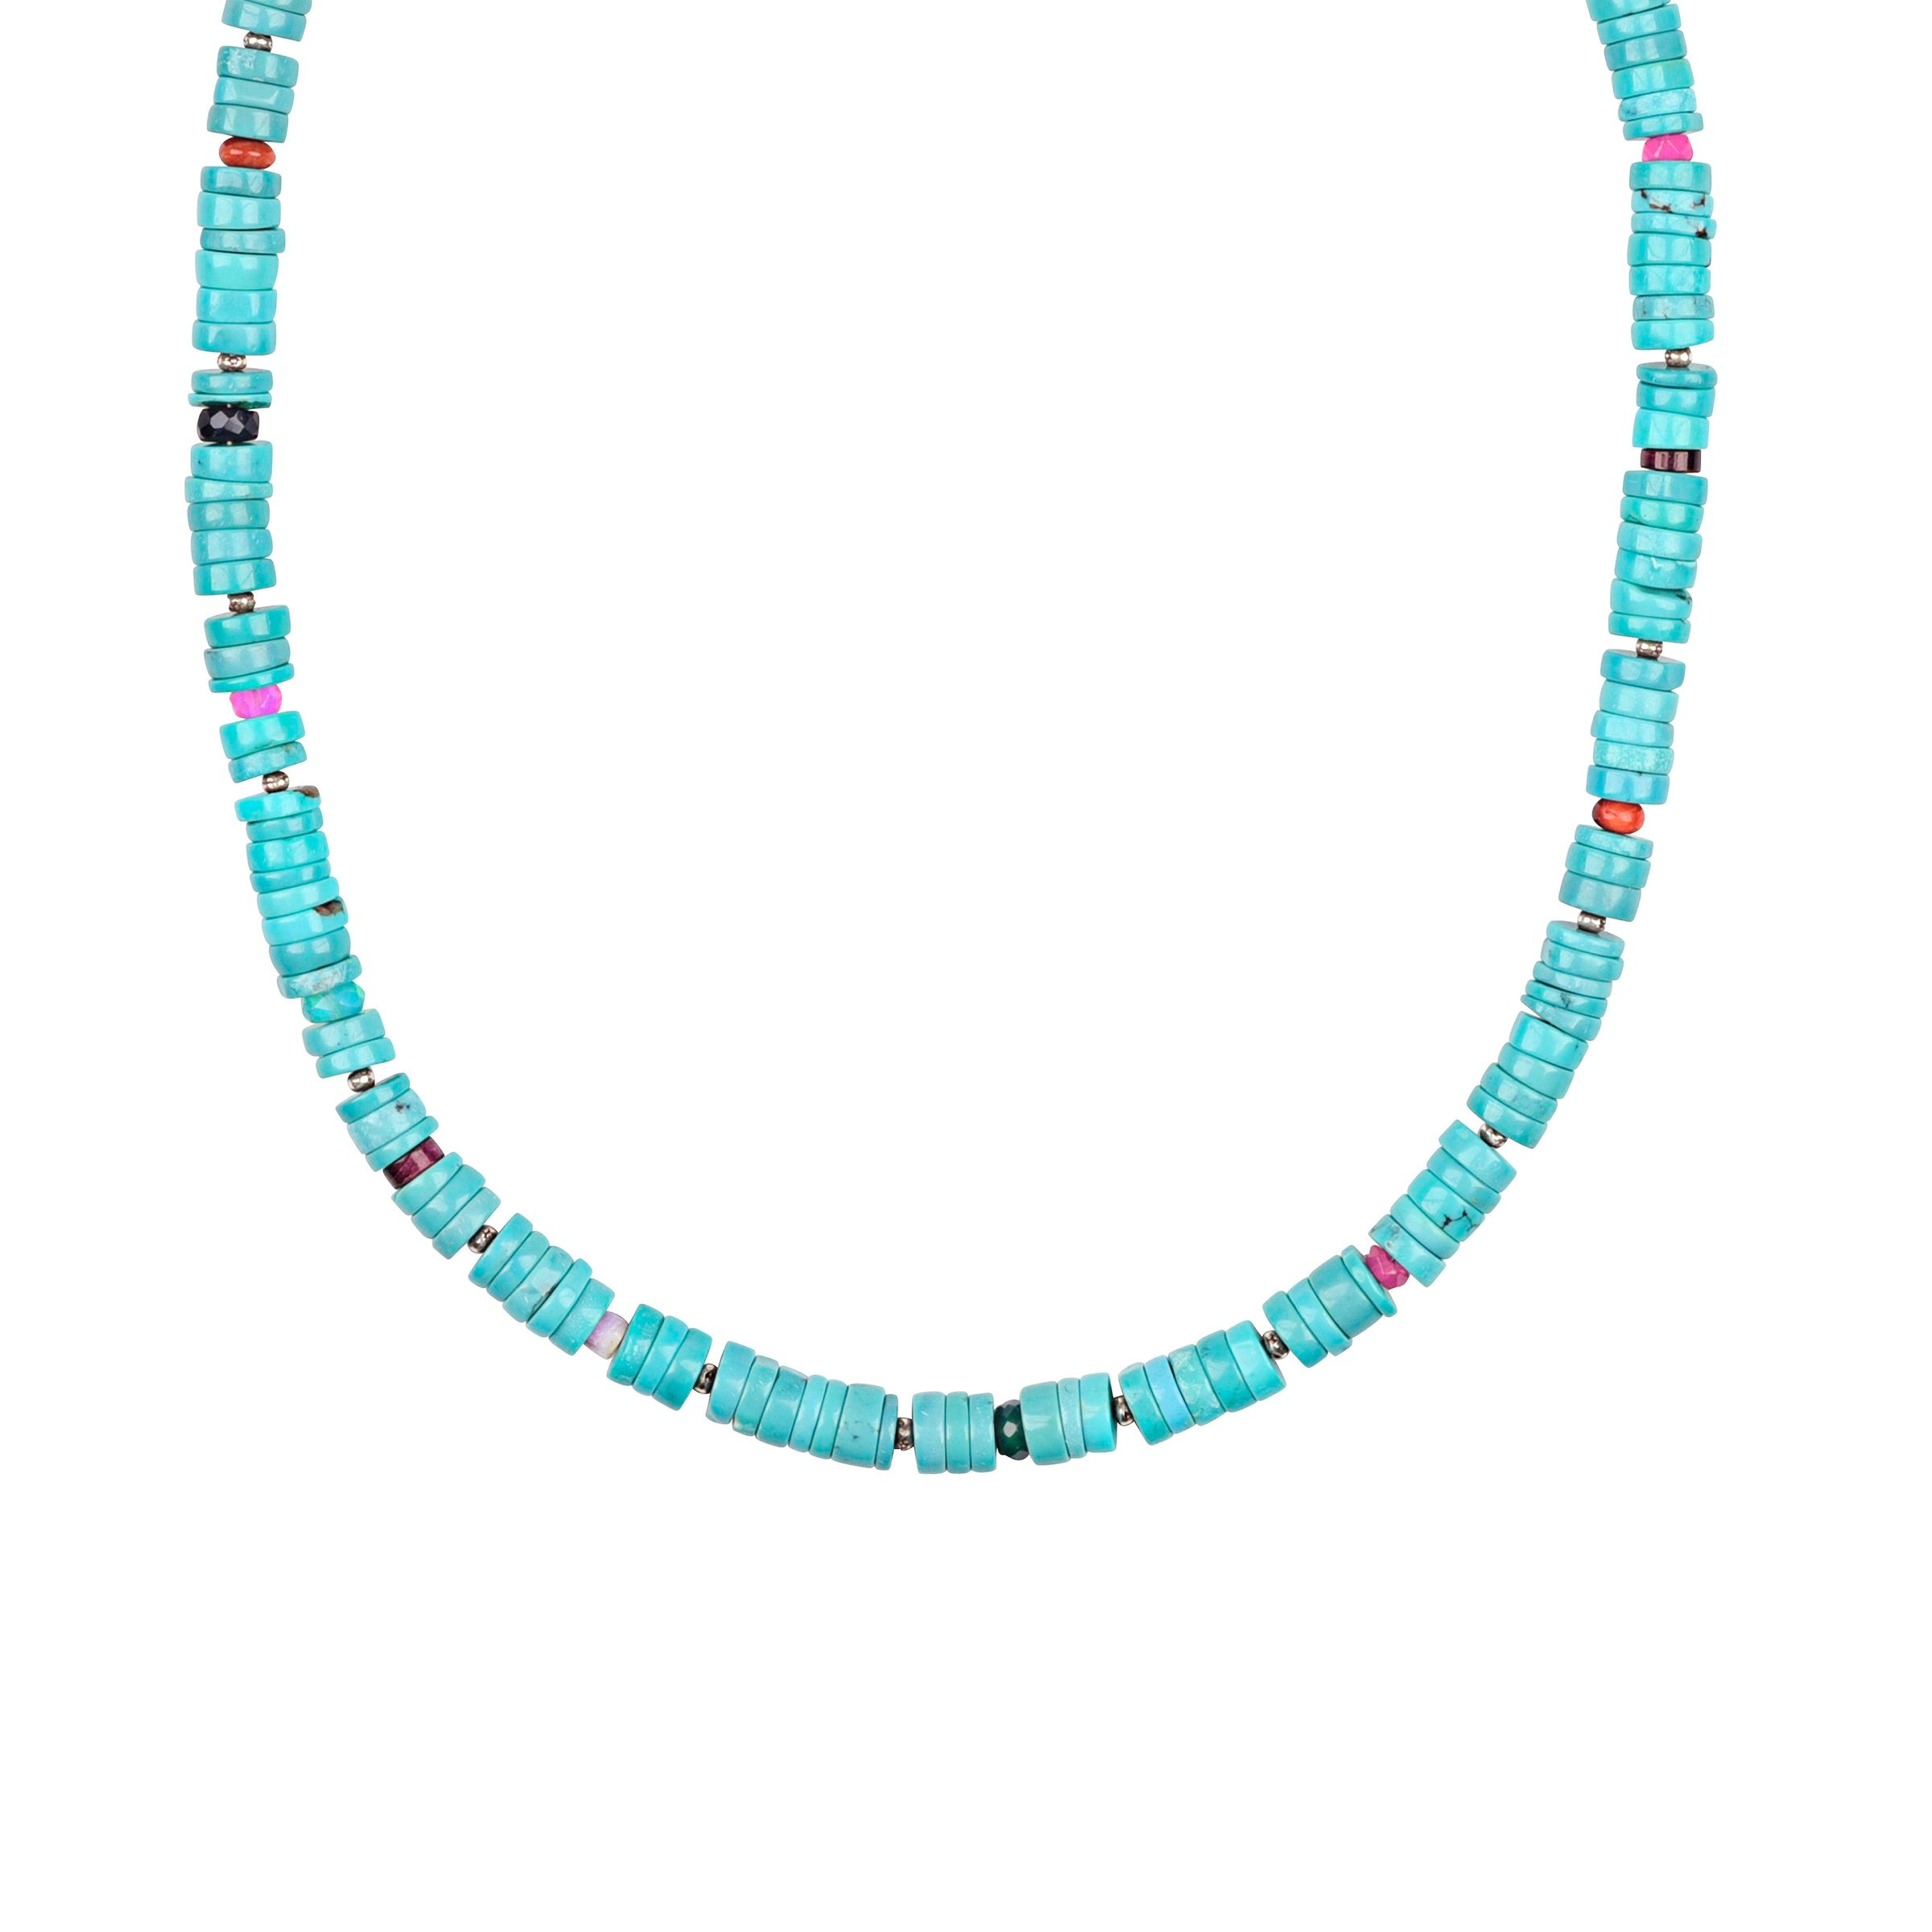 Glaspell Necklace